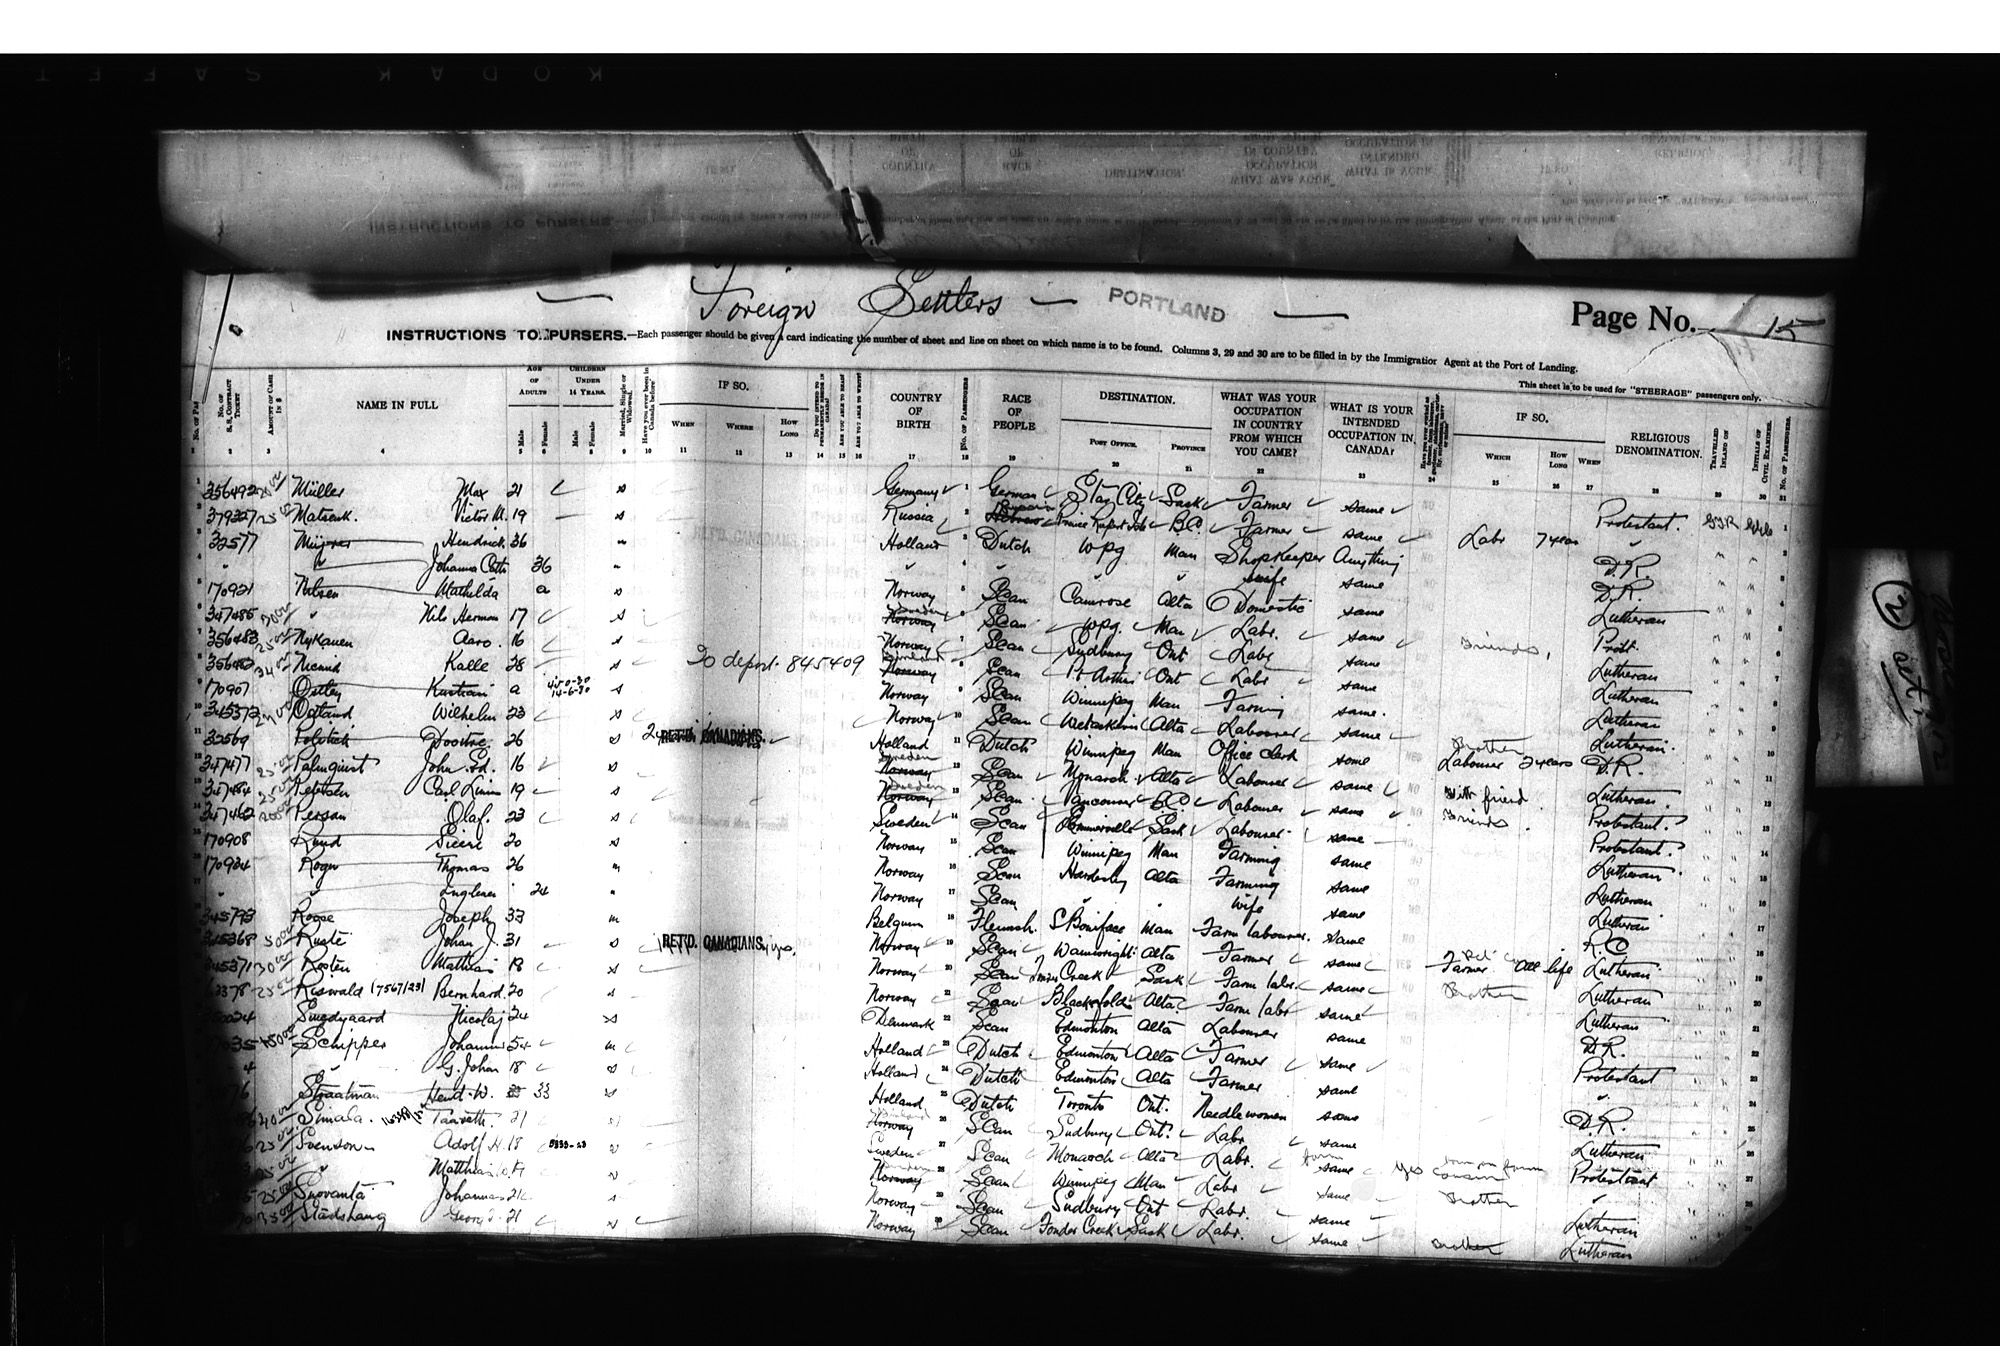 Digitized page of Passenger Lists for Image No.: CANIMM1913PLIST_0000406960-00187